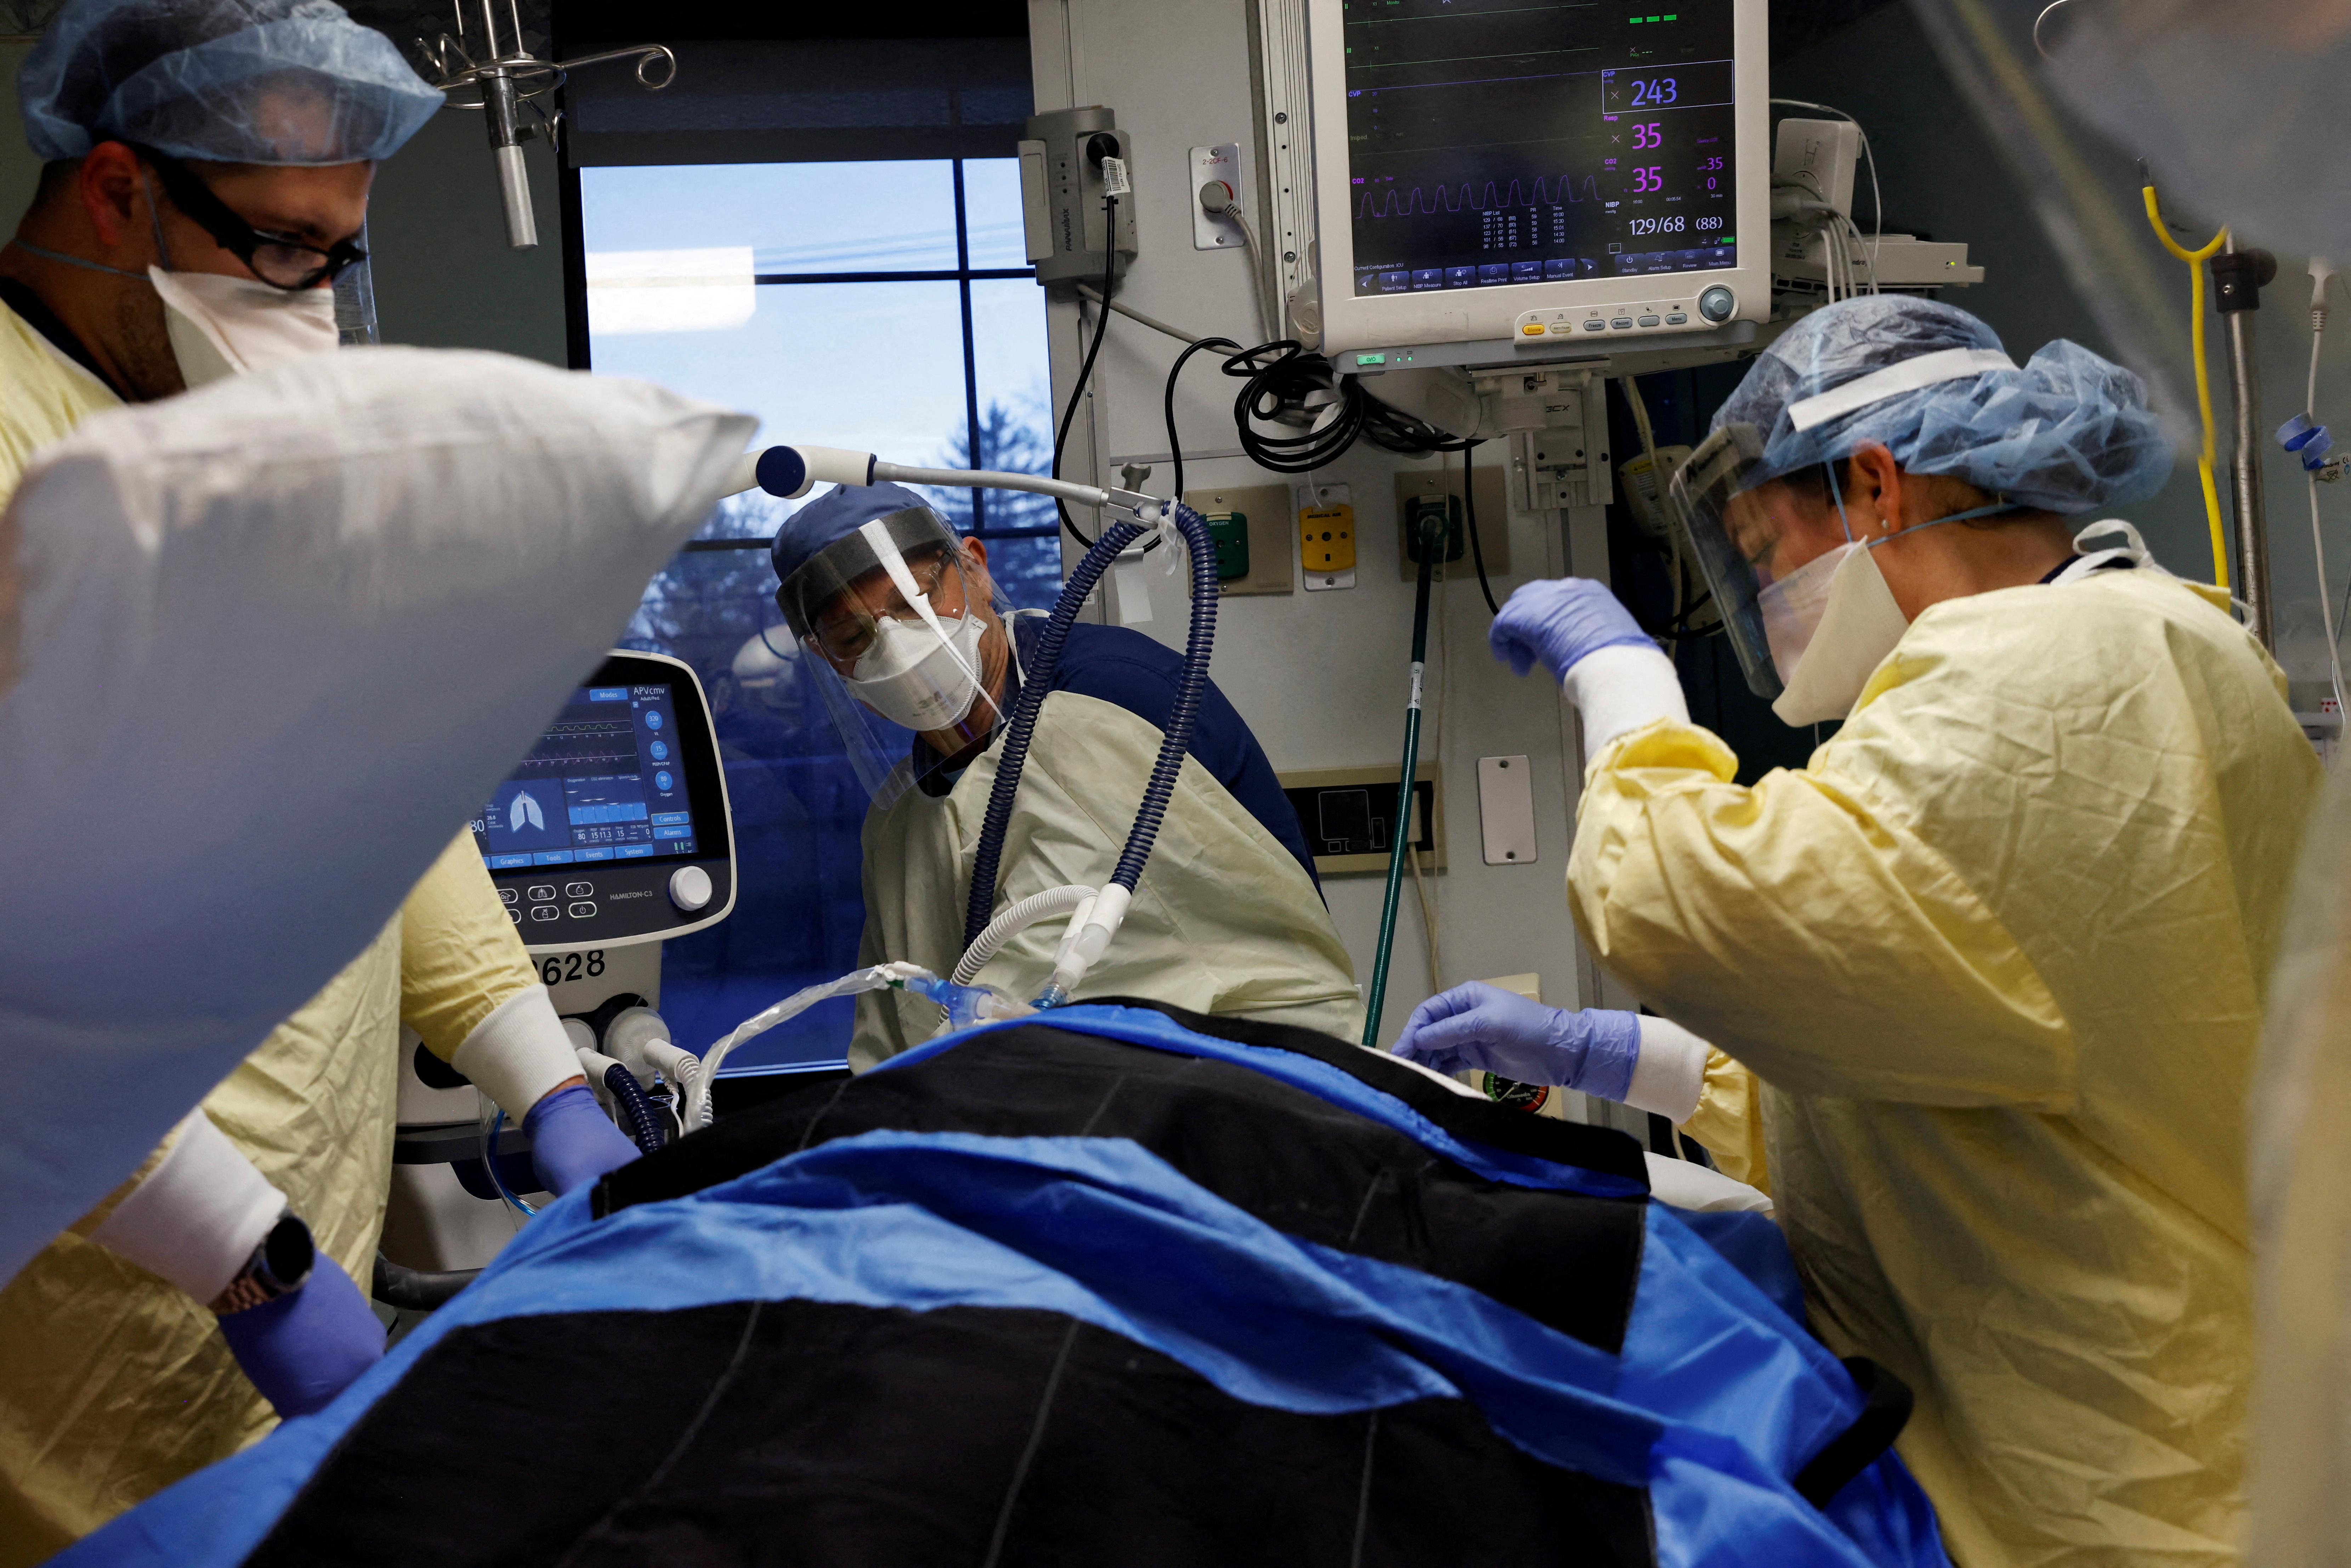 Medical staff treat a coronavirus disease (COVID-19) patient in their isolation room on the Intensive Care Unit (ICU) at Western Reserve Hospital in Cuyahoga Falls, Ohio, U.S., January 4, 2022. REUTERS/Shannon Stapleton